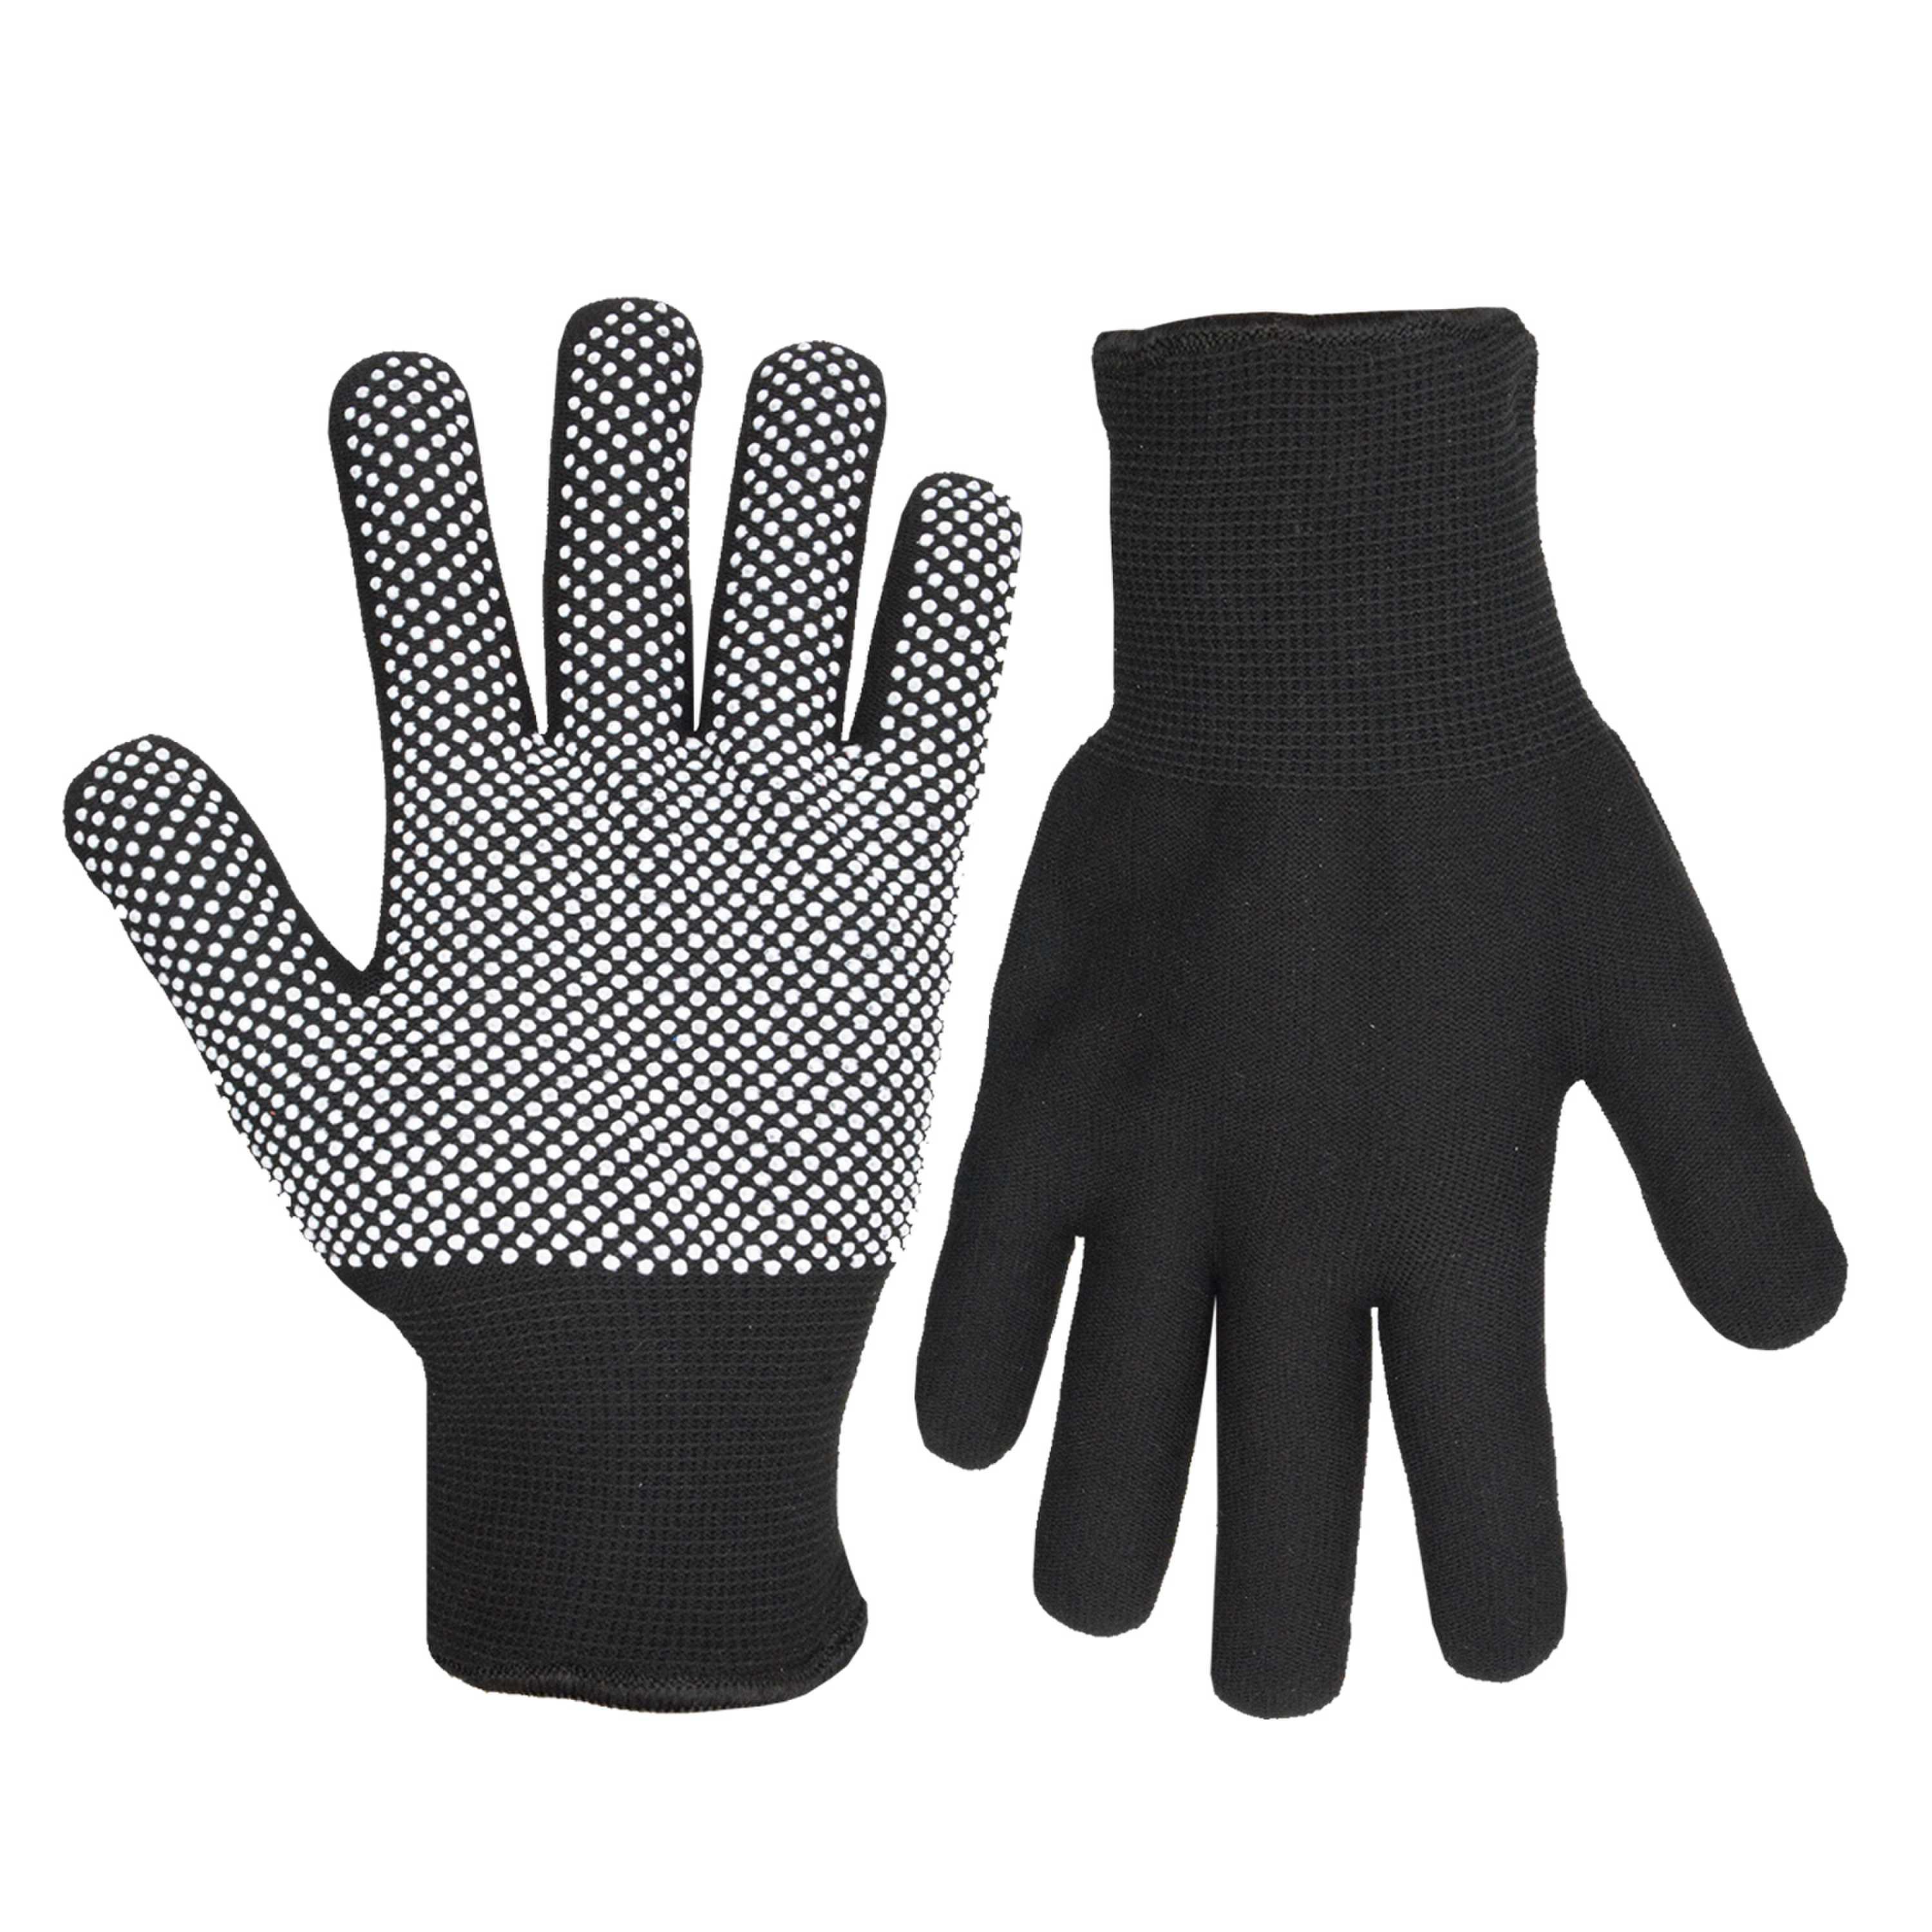 1122 PRISAFETY Outdoor Thermal Winter Work Gloves Warm Lining Anti-slip Dotted Ski Winter Cotton Gym Gloves, Weight Lifting Gloves